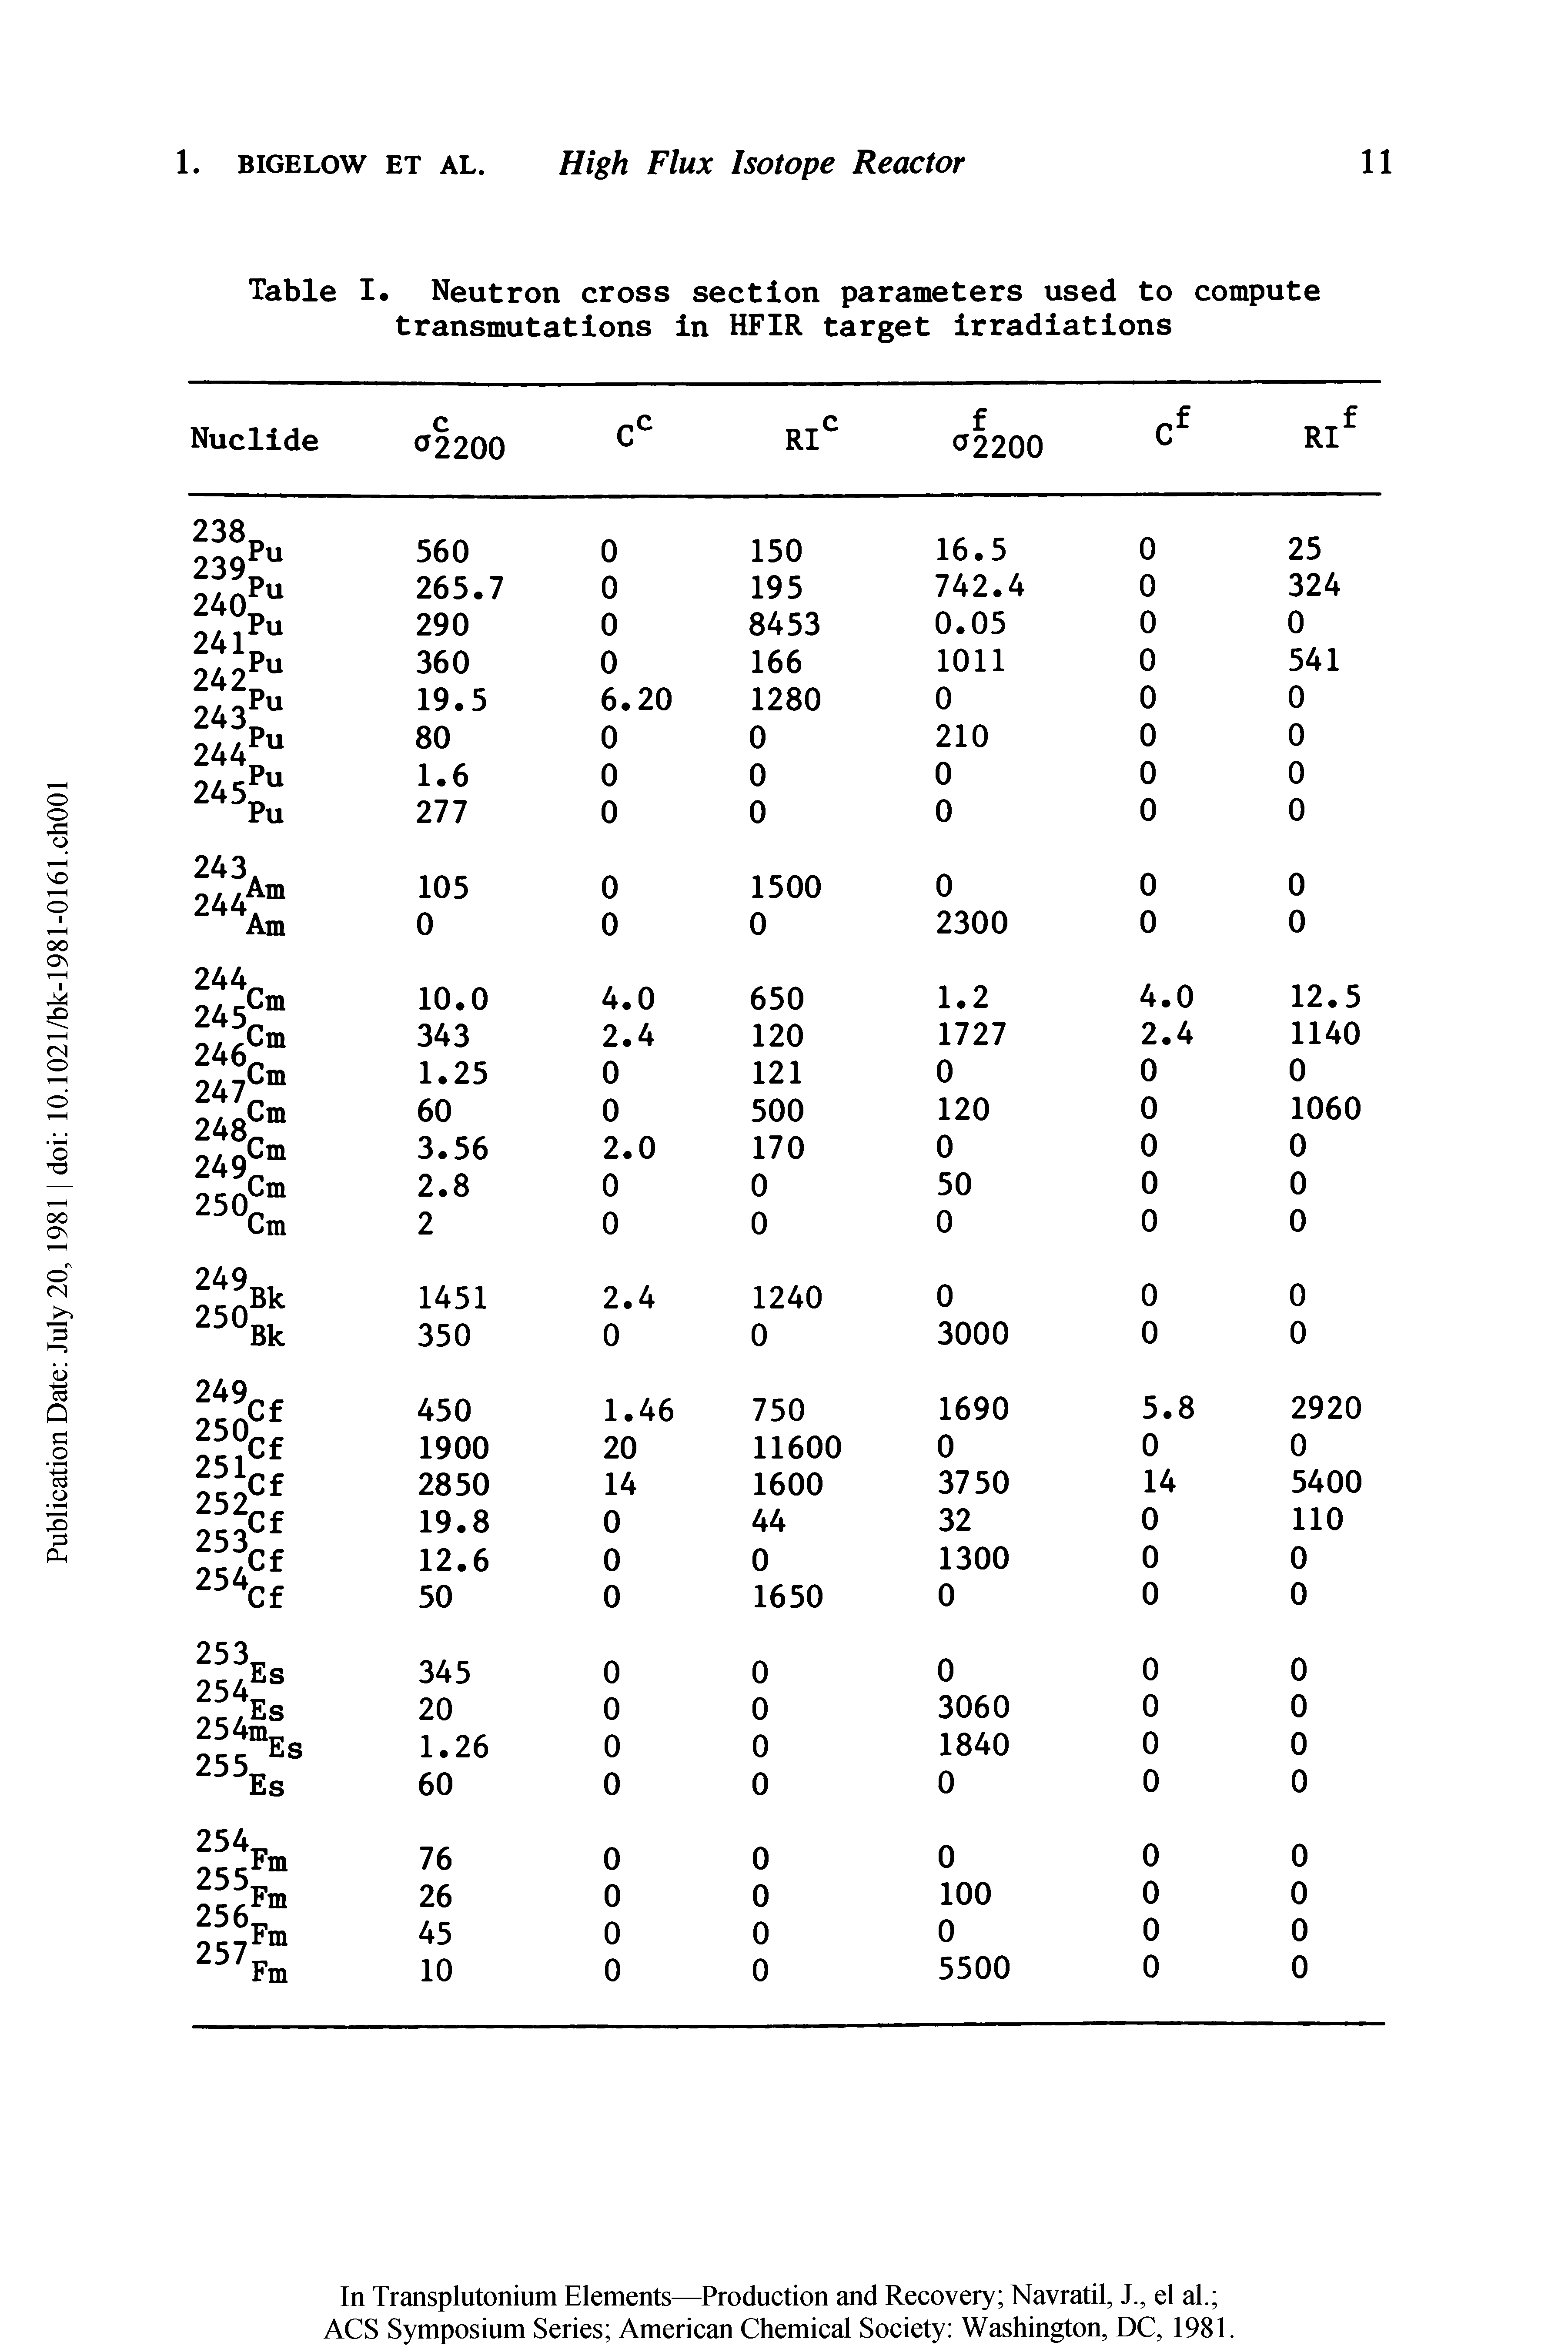 Table I. Neutron cross section parameters used to compute transmutations in HFIR target irradiations...